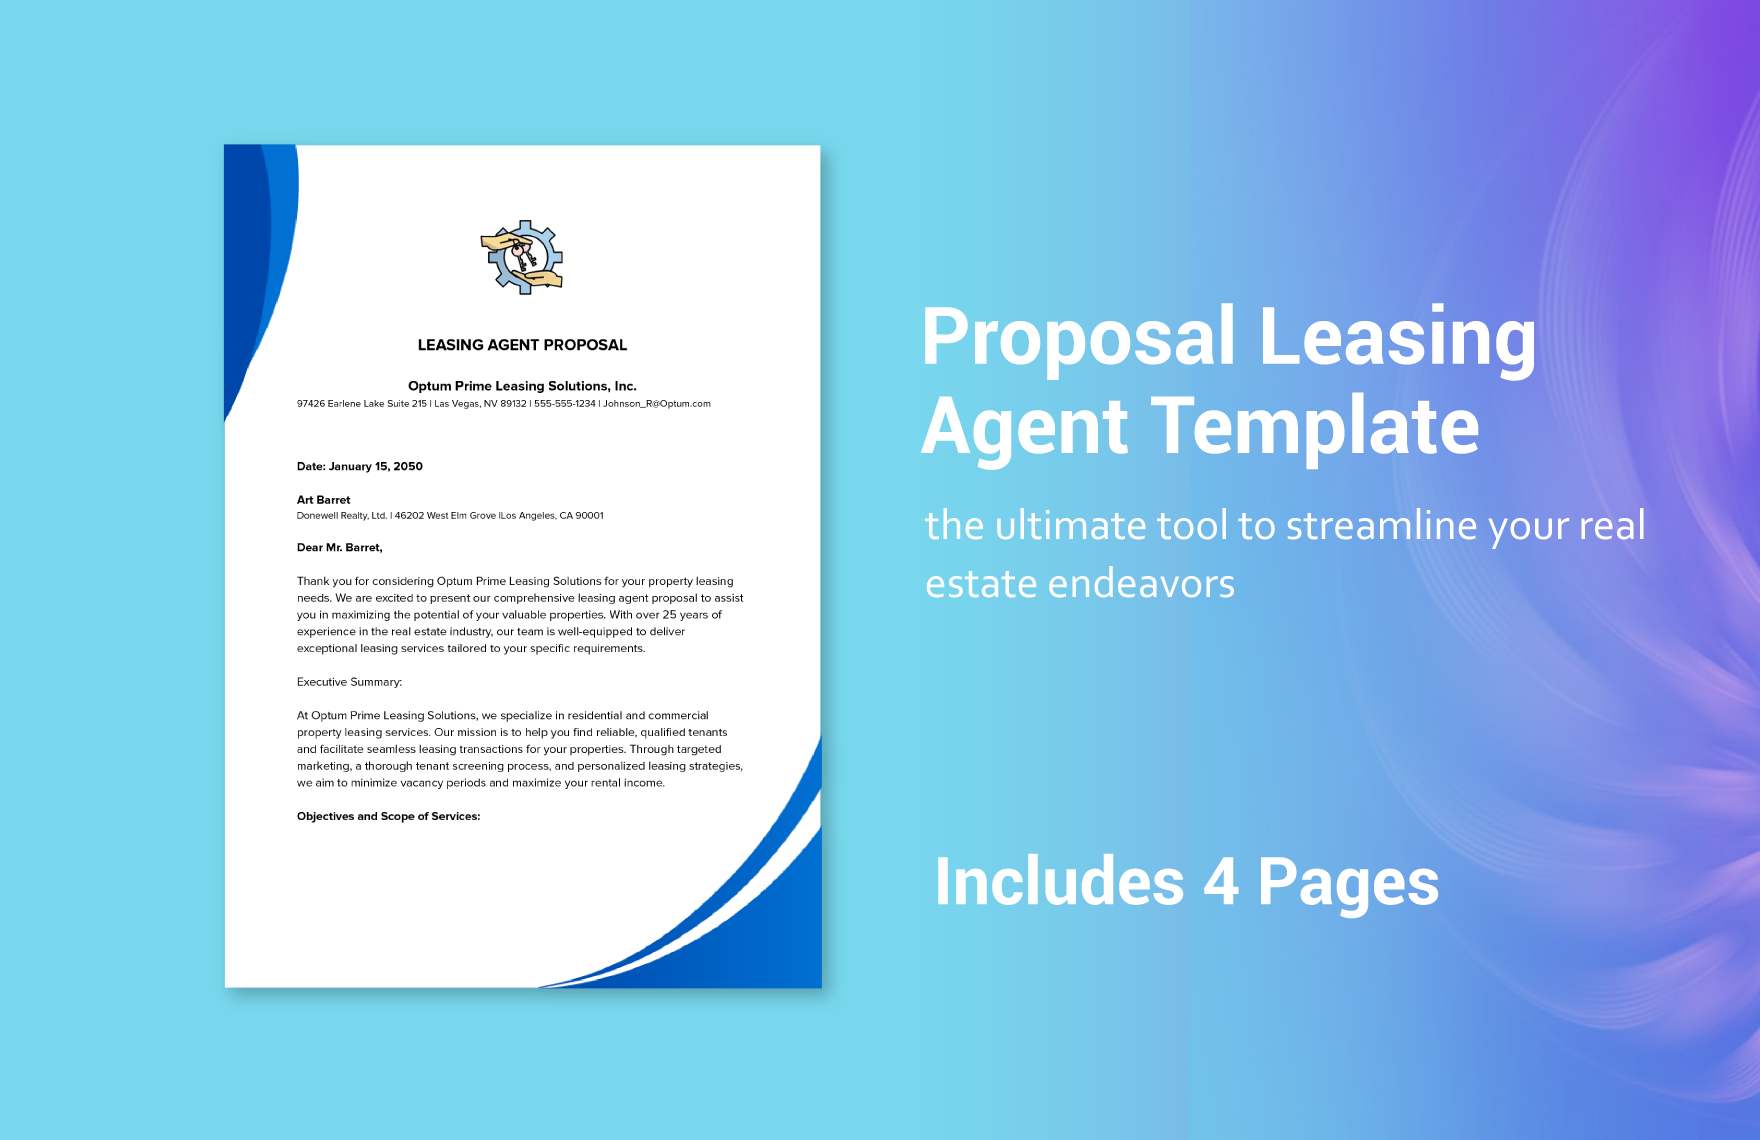 Proposal Leasing Agent Template